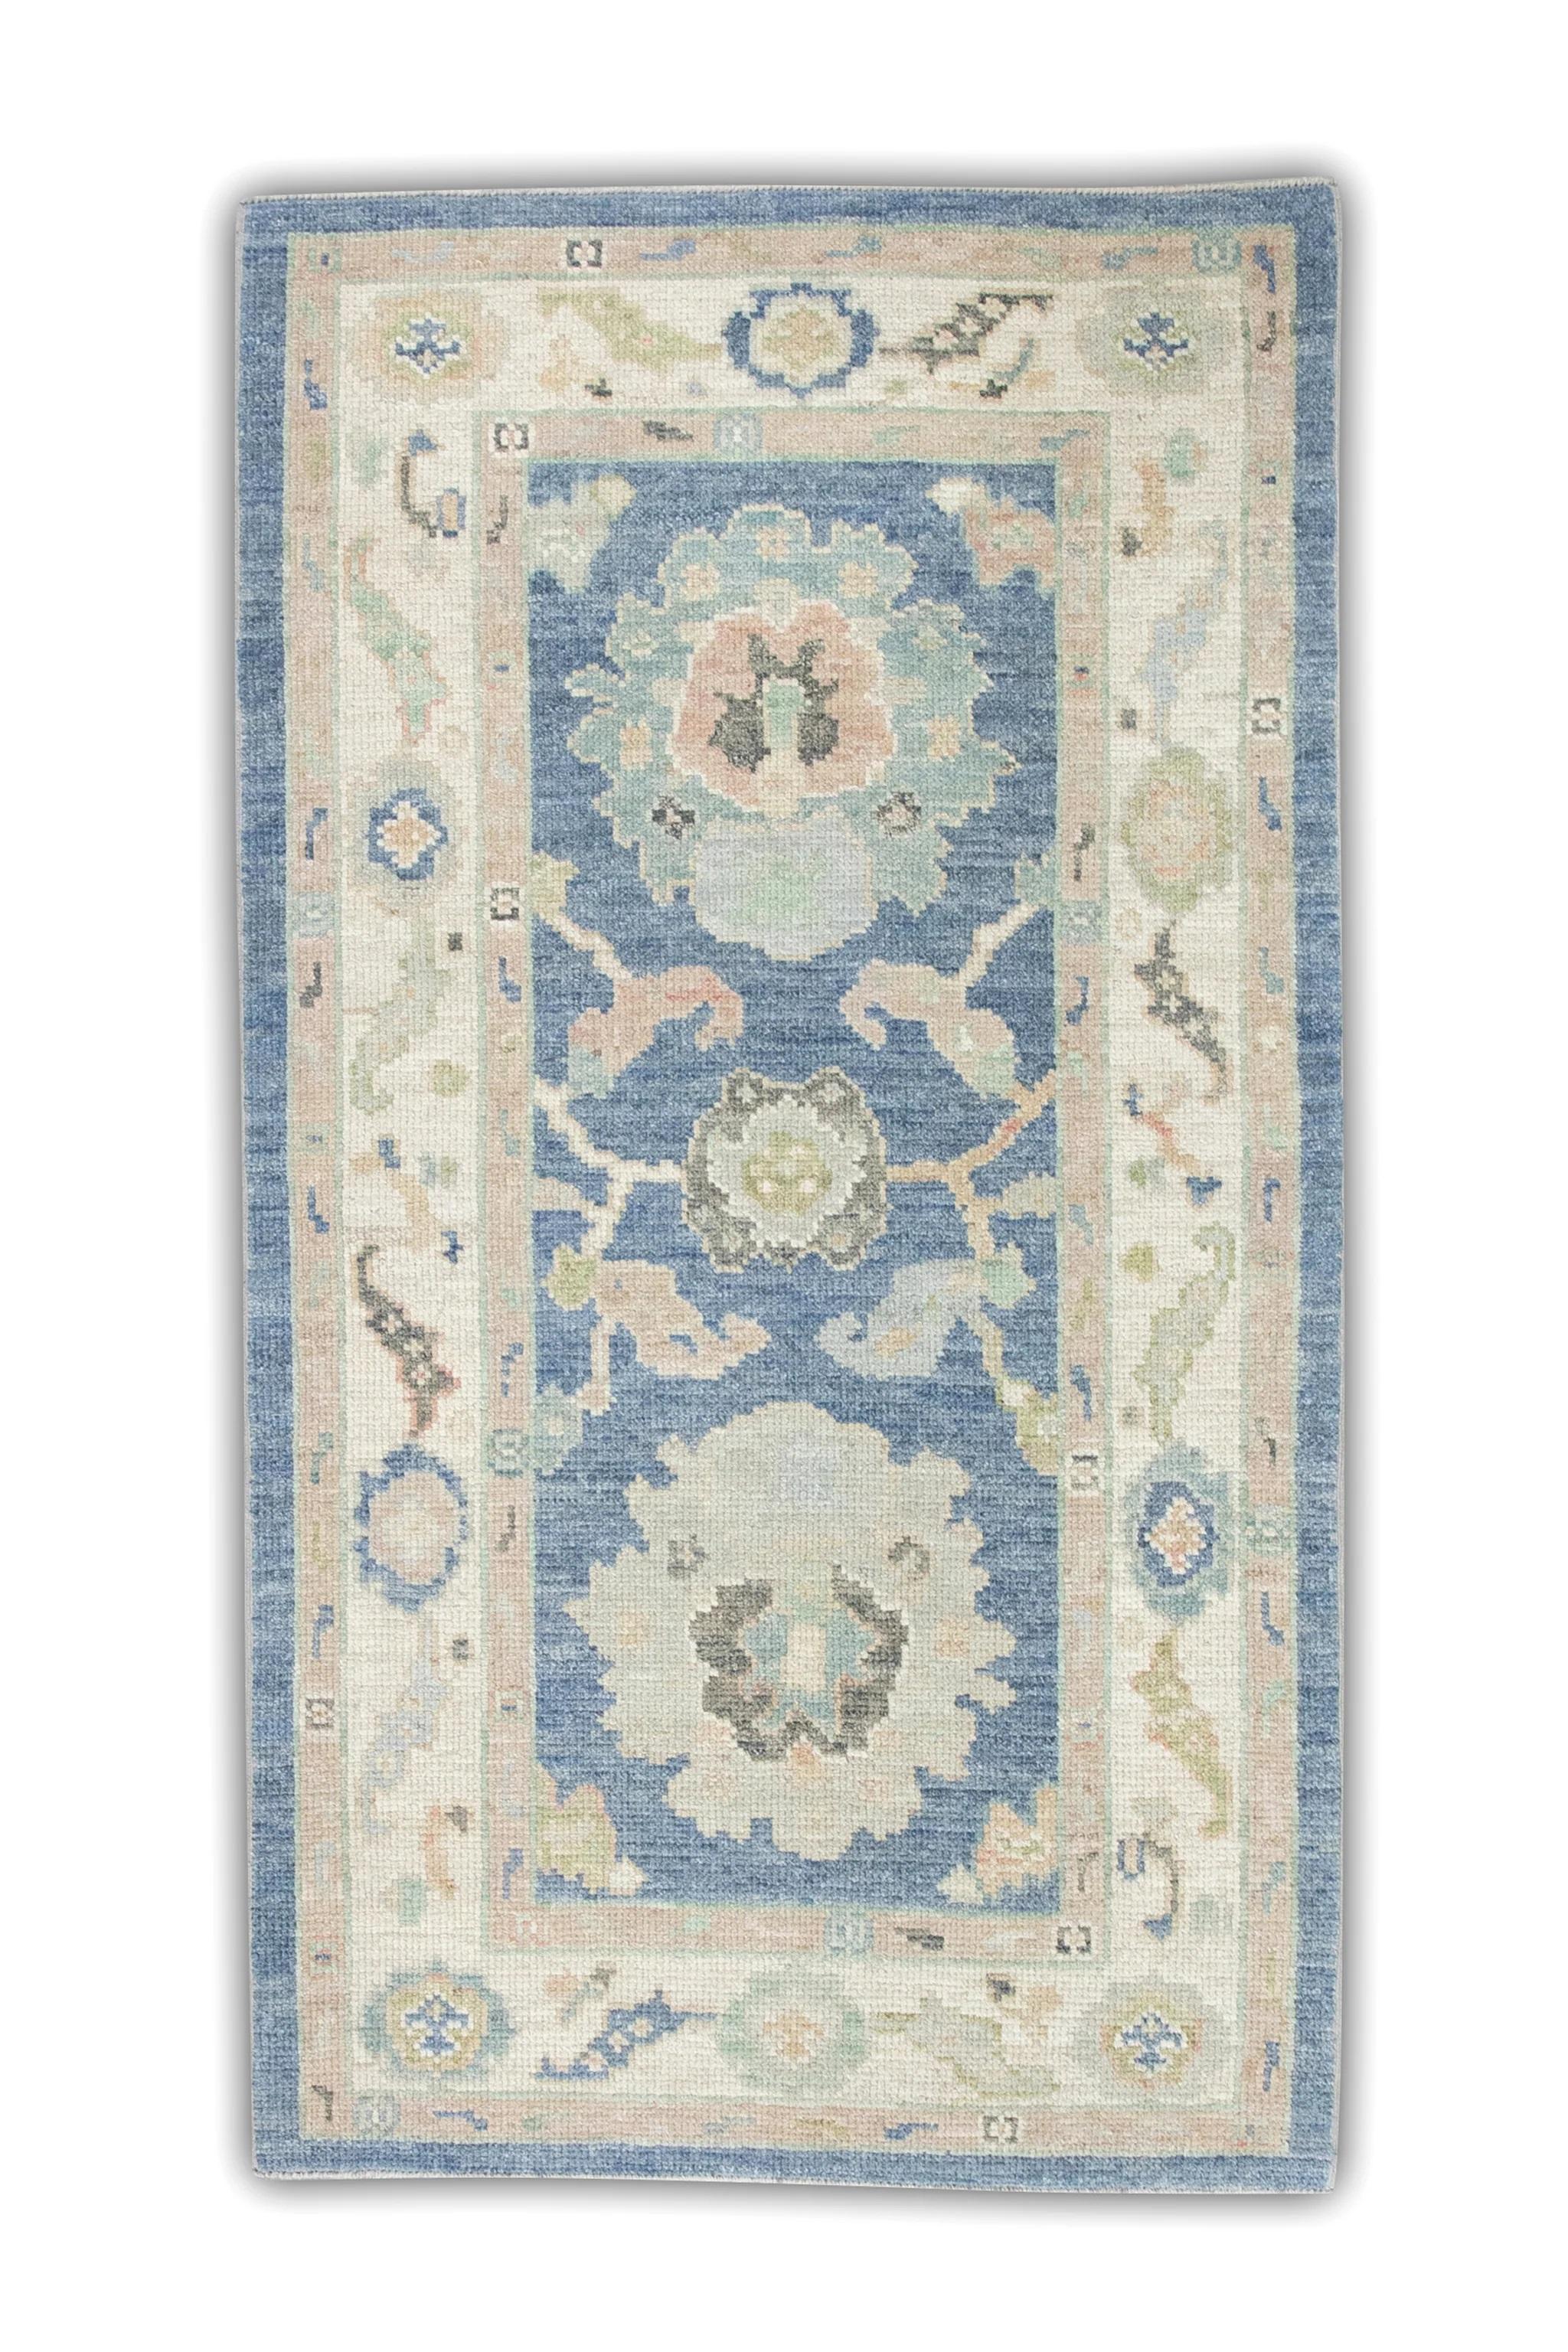 Contemporary Blue and Pink Floral Handwoven Wool Turkish Oushak Rug 2'10